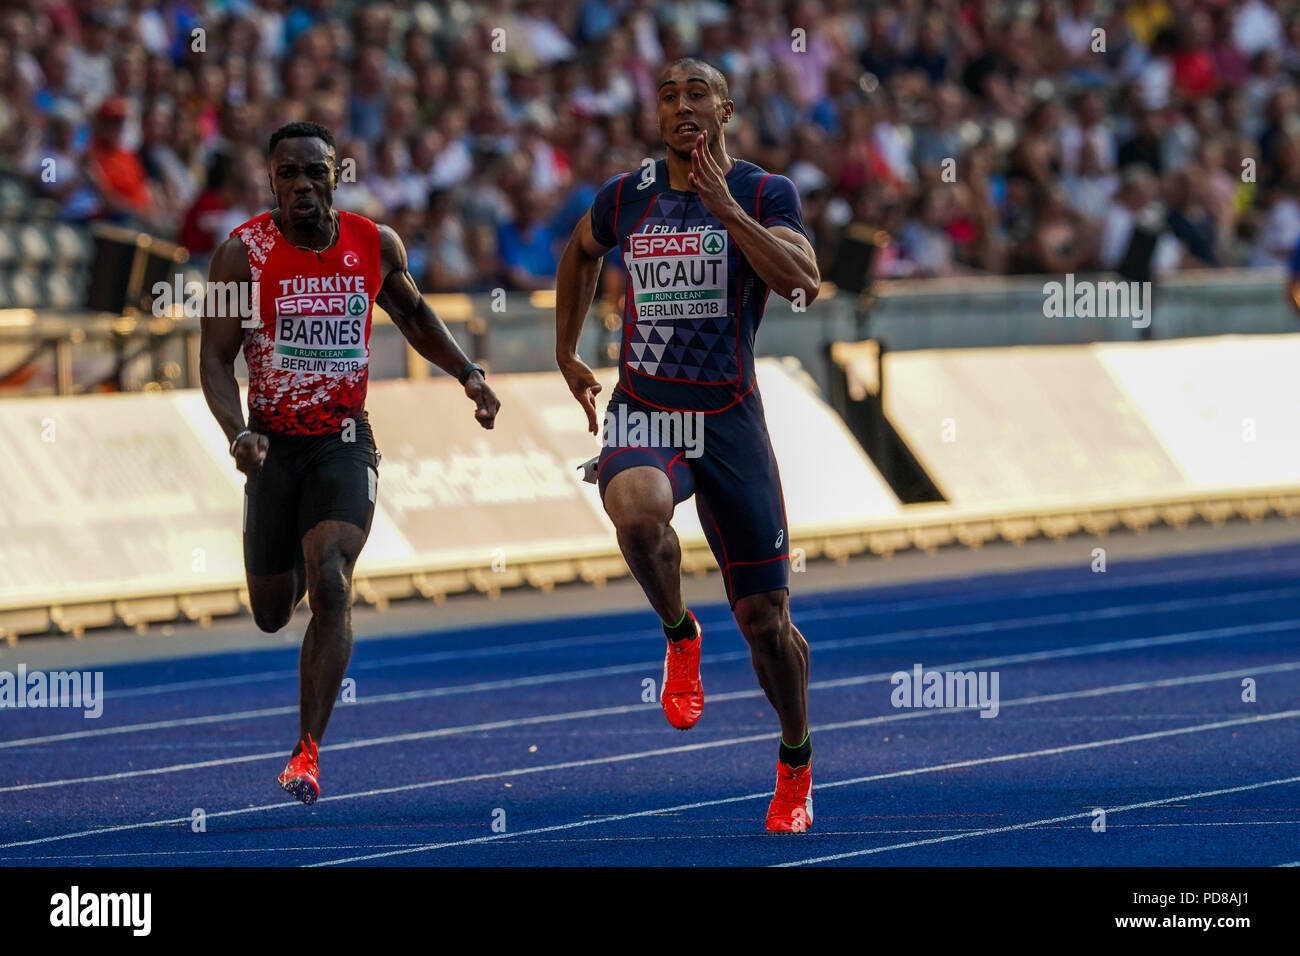 August 7, 2018: Jimmy Vicaut of Â France and Emre Zafer Barnes of Â Turkey during 100 meter mens semifinals at the Olympic Stadium in Berlin at the European Athletics Championship. Ulrik Pedersen/CSM Stock Photo